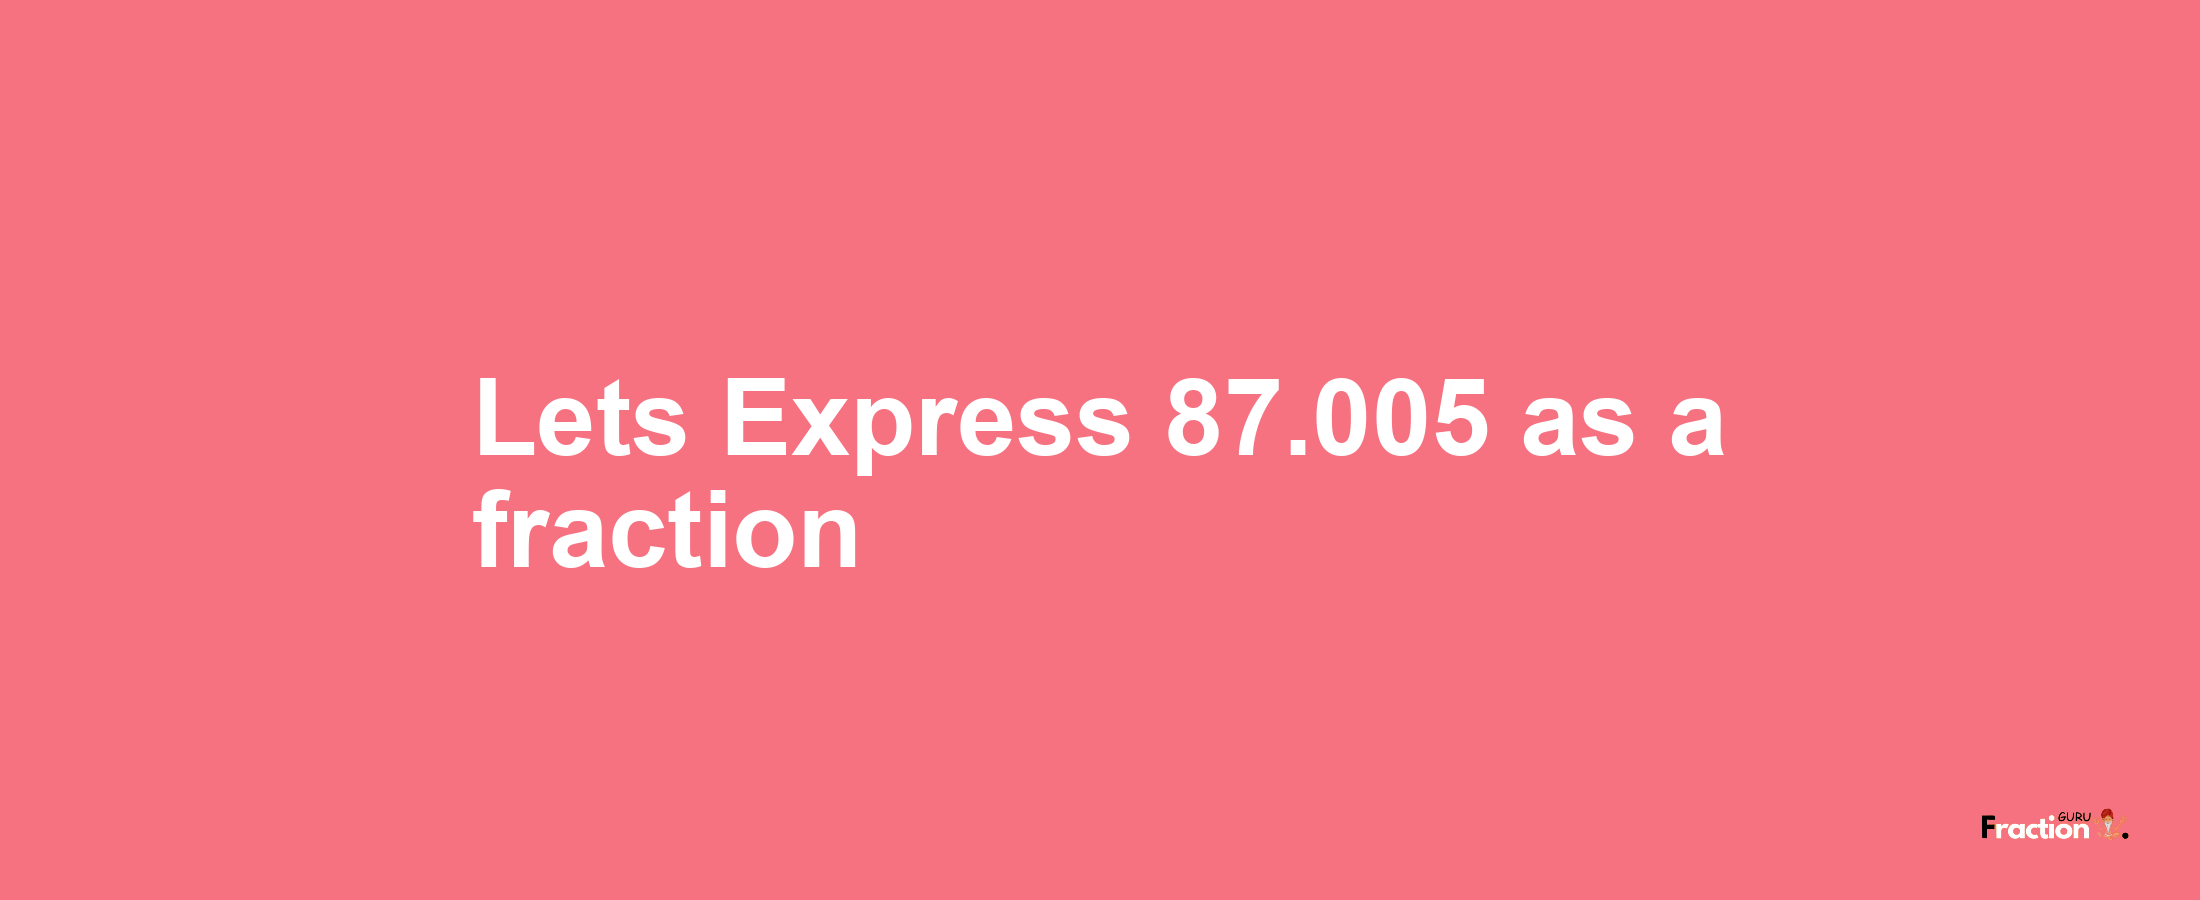 Lets Express 87.005 as afraction